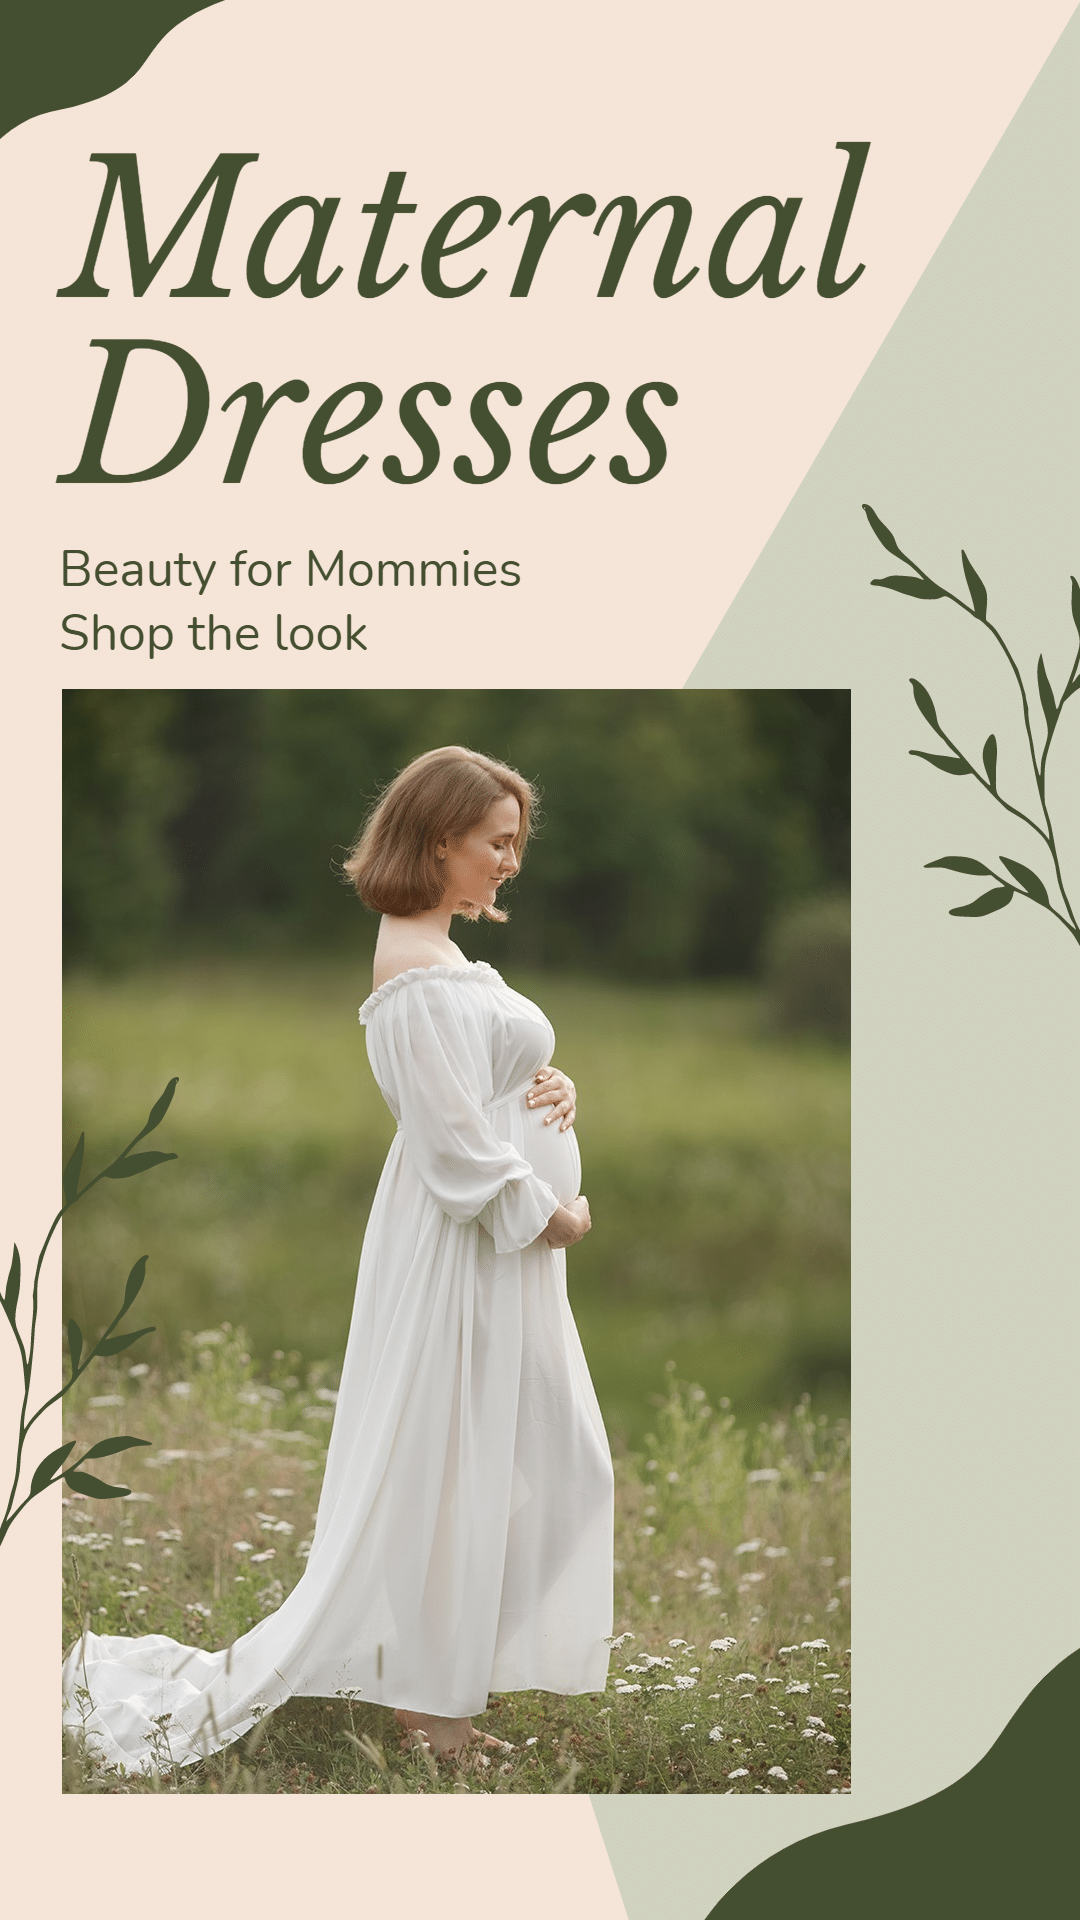 Green Block Element Fresh Style Maternal Dresses Outfit Display Ecommerce Story预览效果